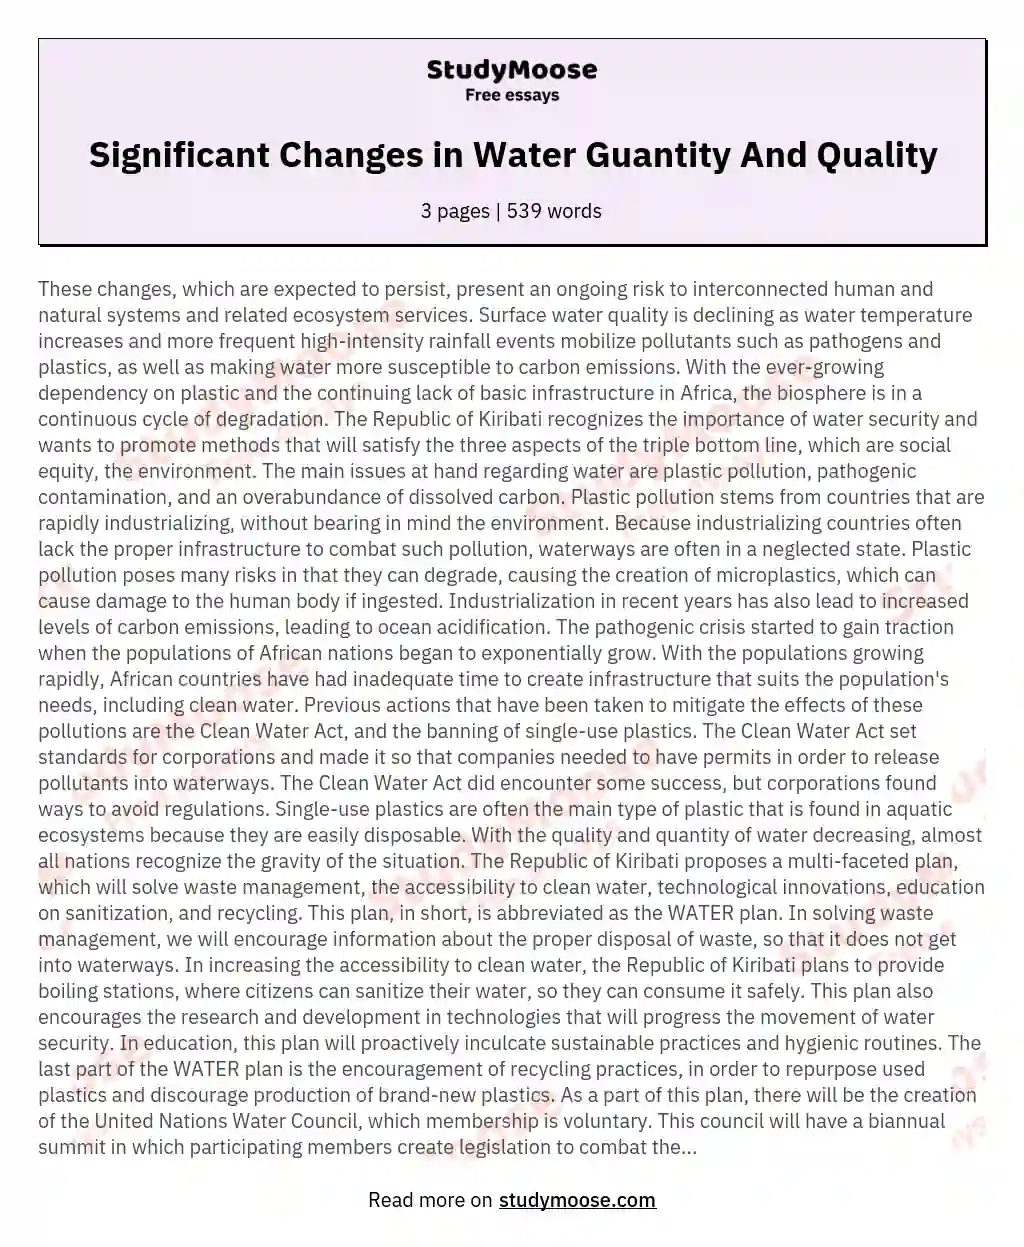 Significant Changes in Water Guantity And Quality essay